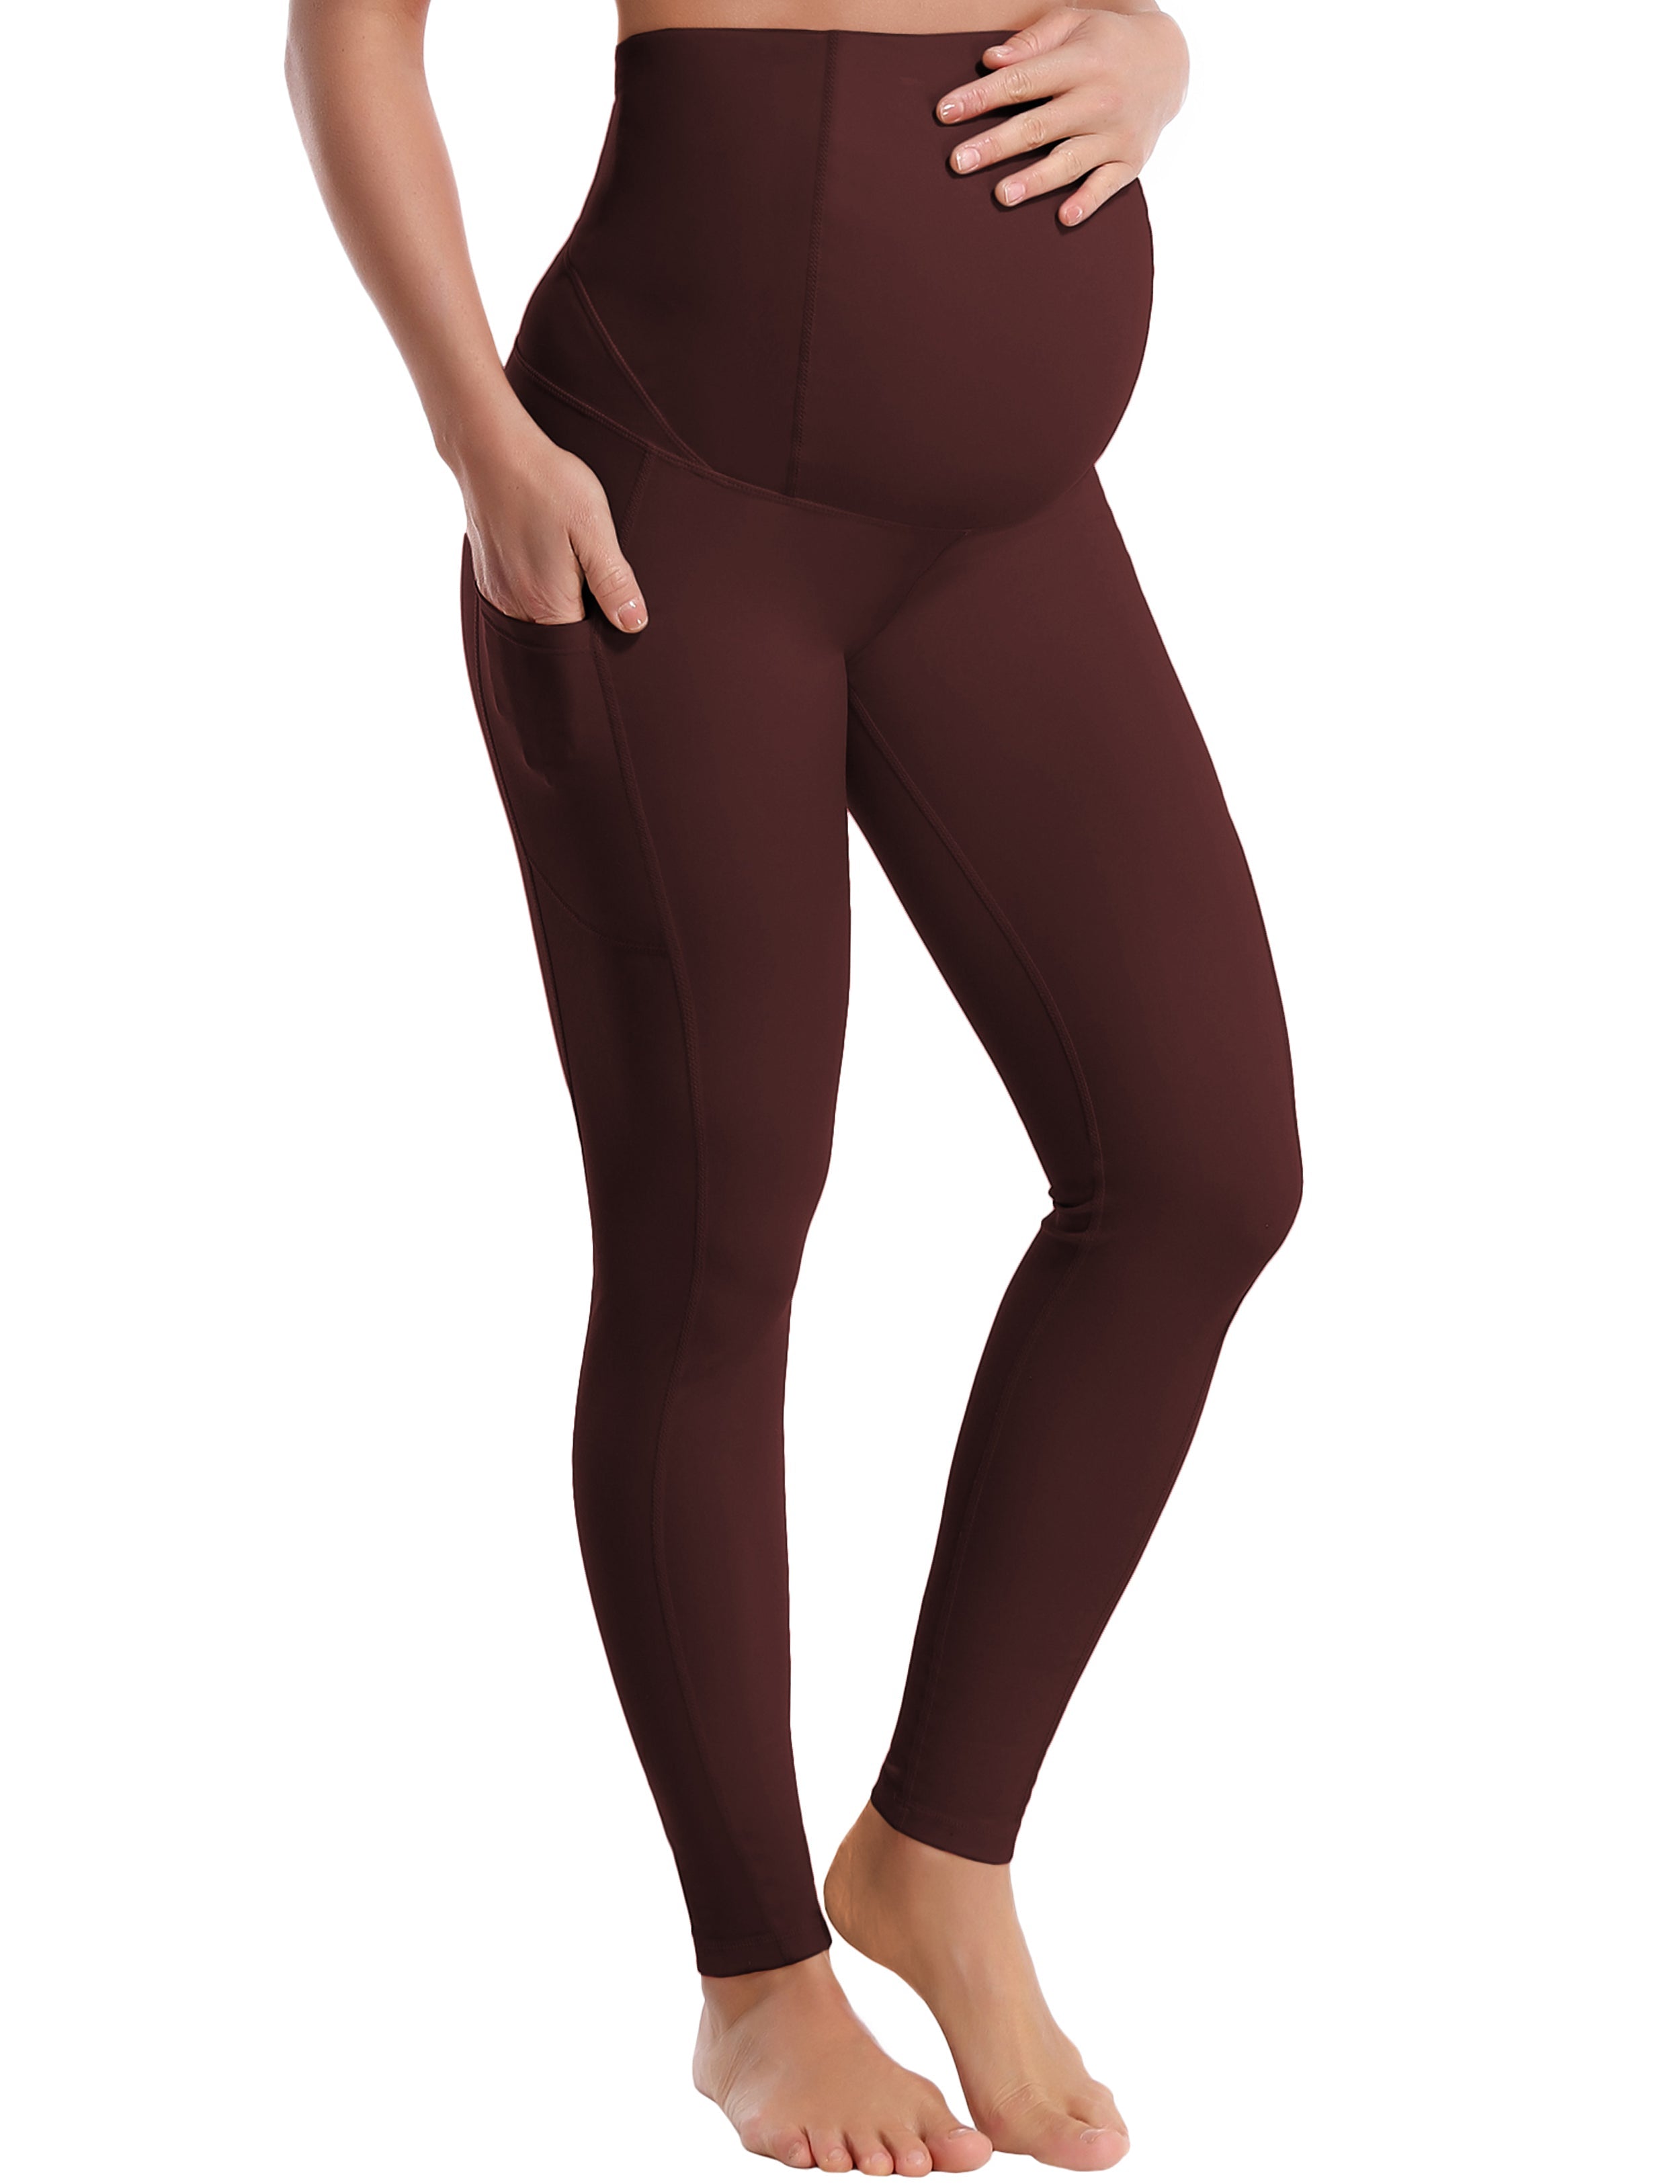 26" Side Pockets Maternity Biking Pants mahoganymaroon 87%Nylon/13%Spandex Softest-ever fabric High elasticity 4-way stretch Fabric doesn't attract lint easily No see-through Moisture-wicking Machine wash